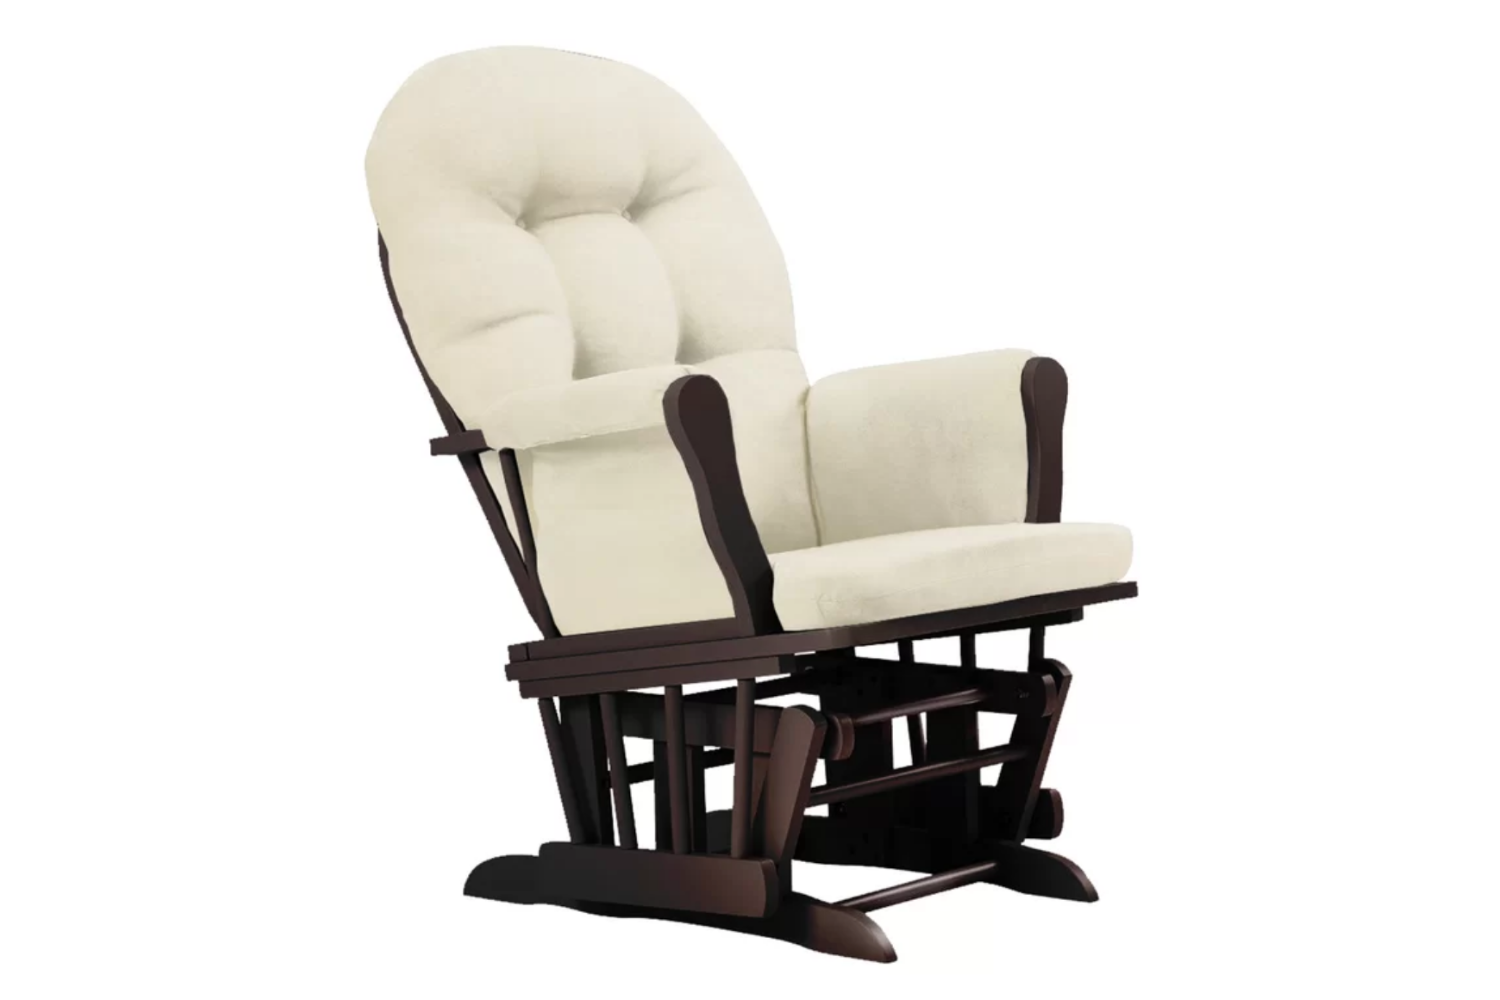 rocking chairs for new moms